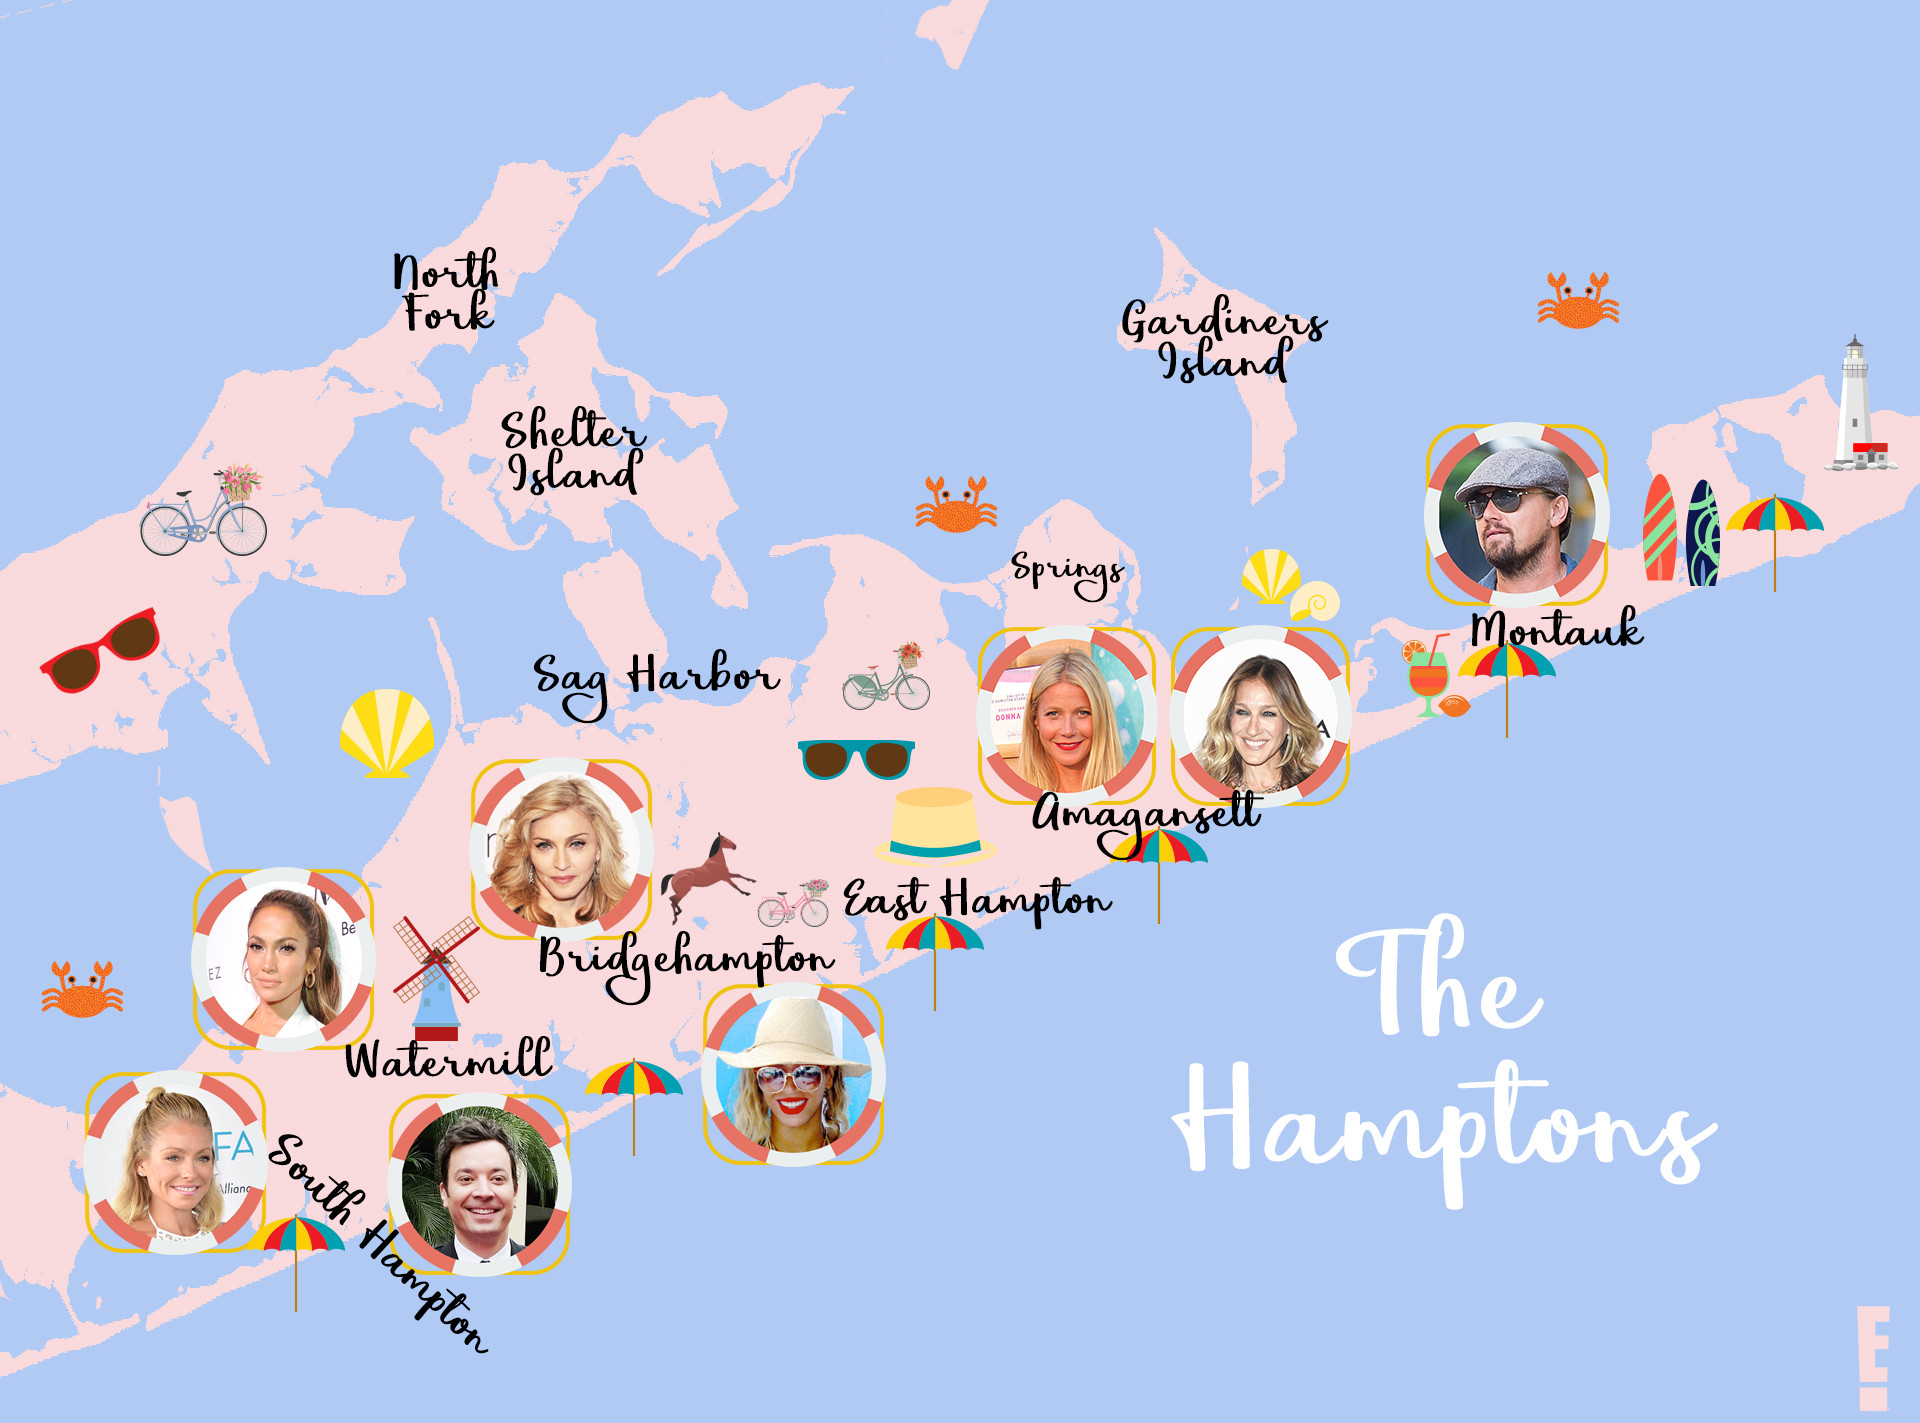 Rs 1920x1423 170525171834 1024 The Hamptons Celebrities Mh 052517 ?fit=around|1920 1423&output Quality=90&crop=1920 1423;center,top